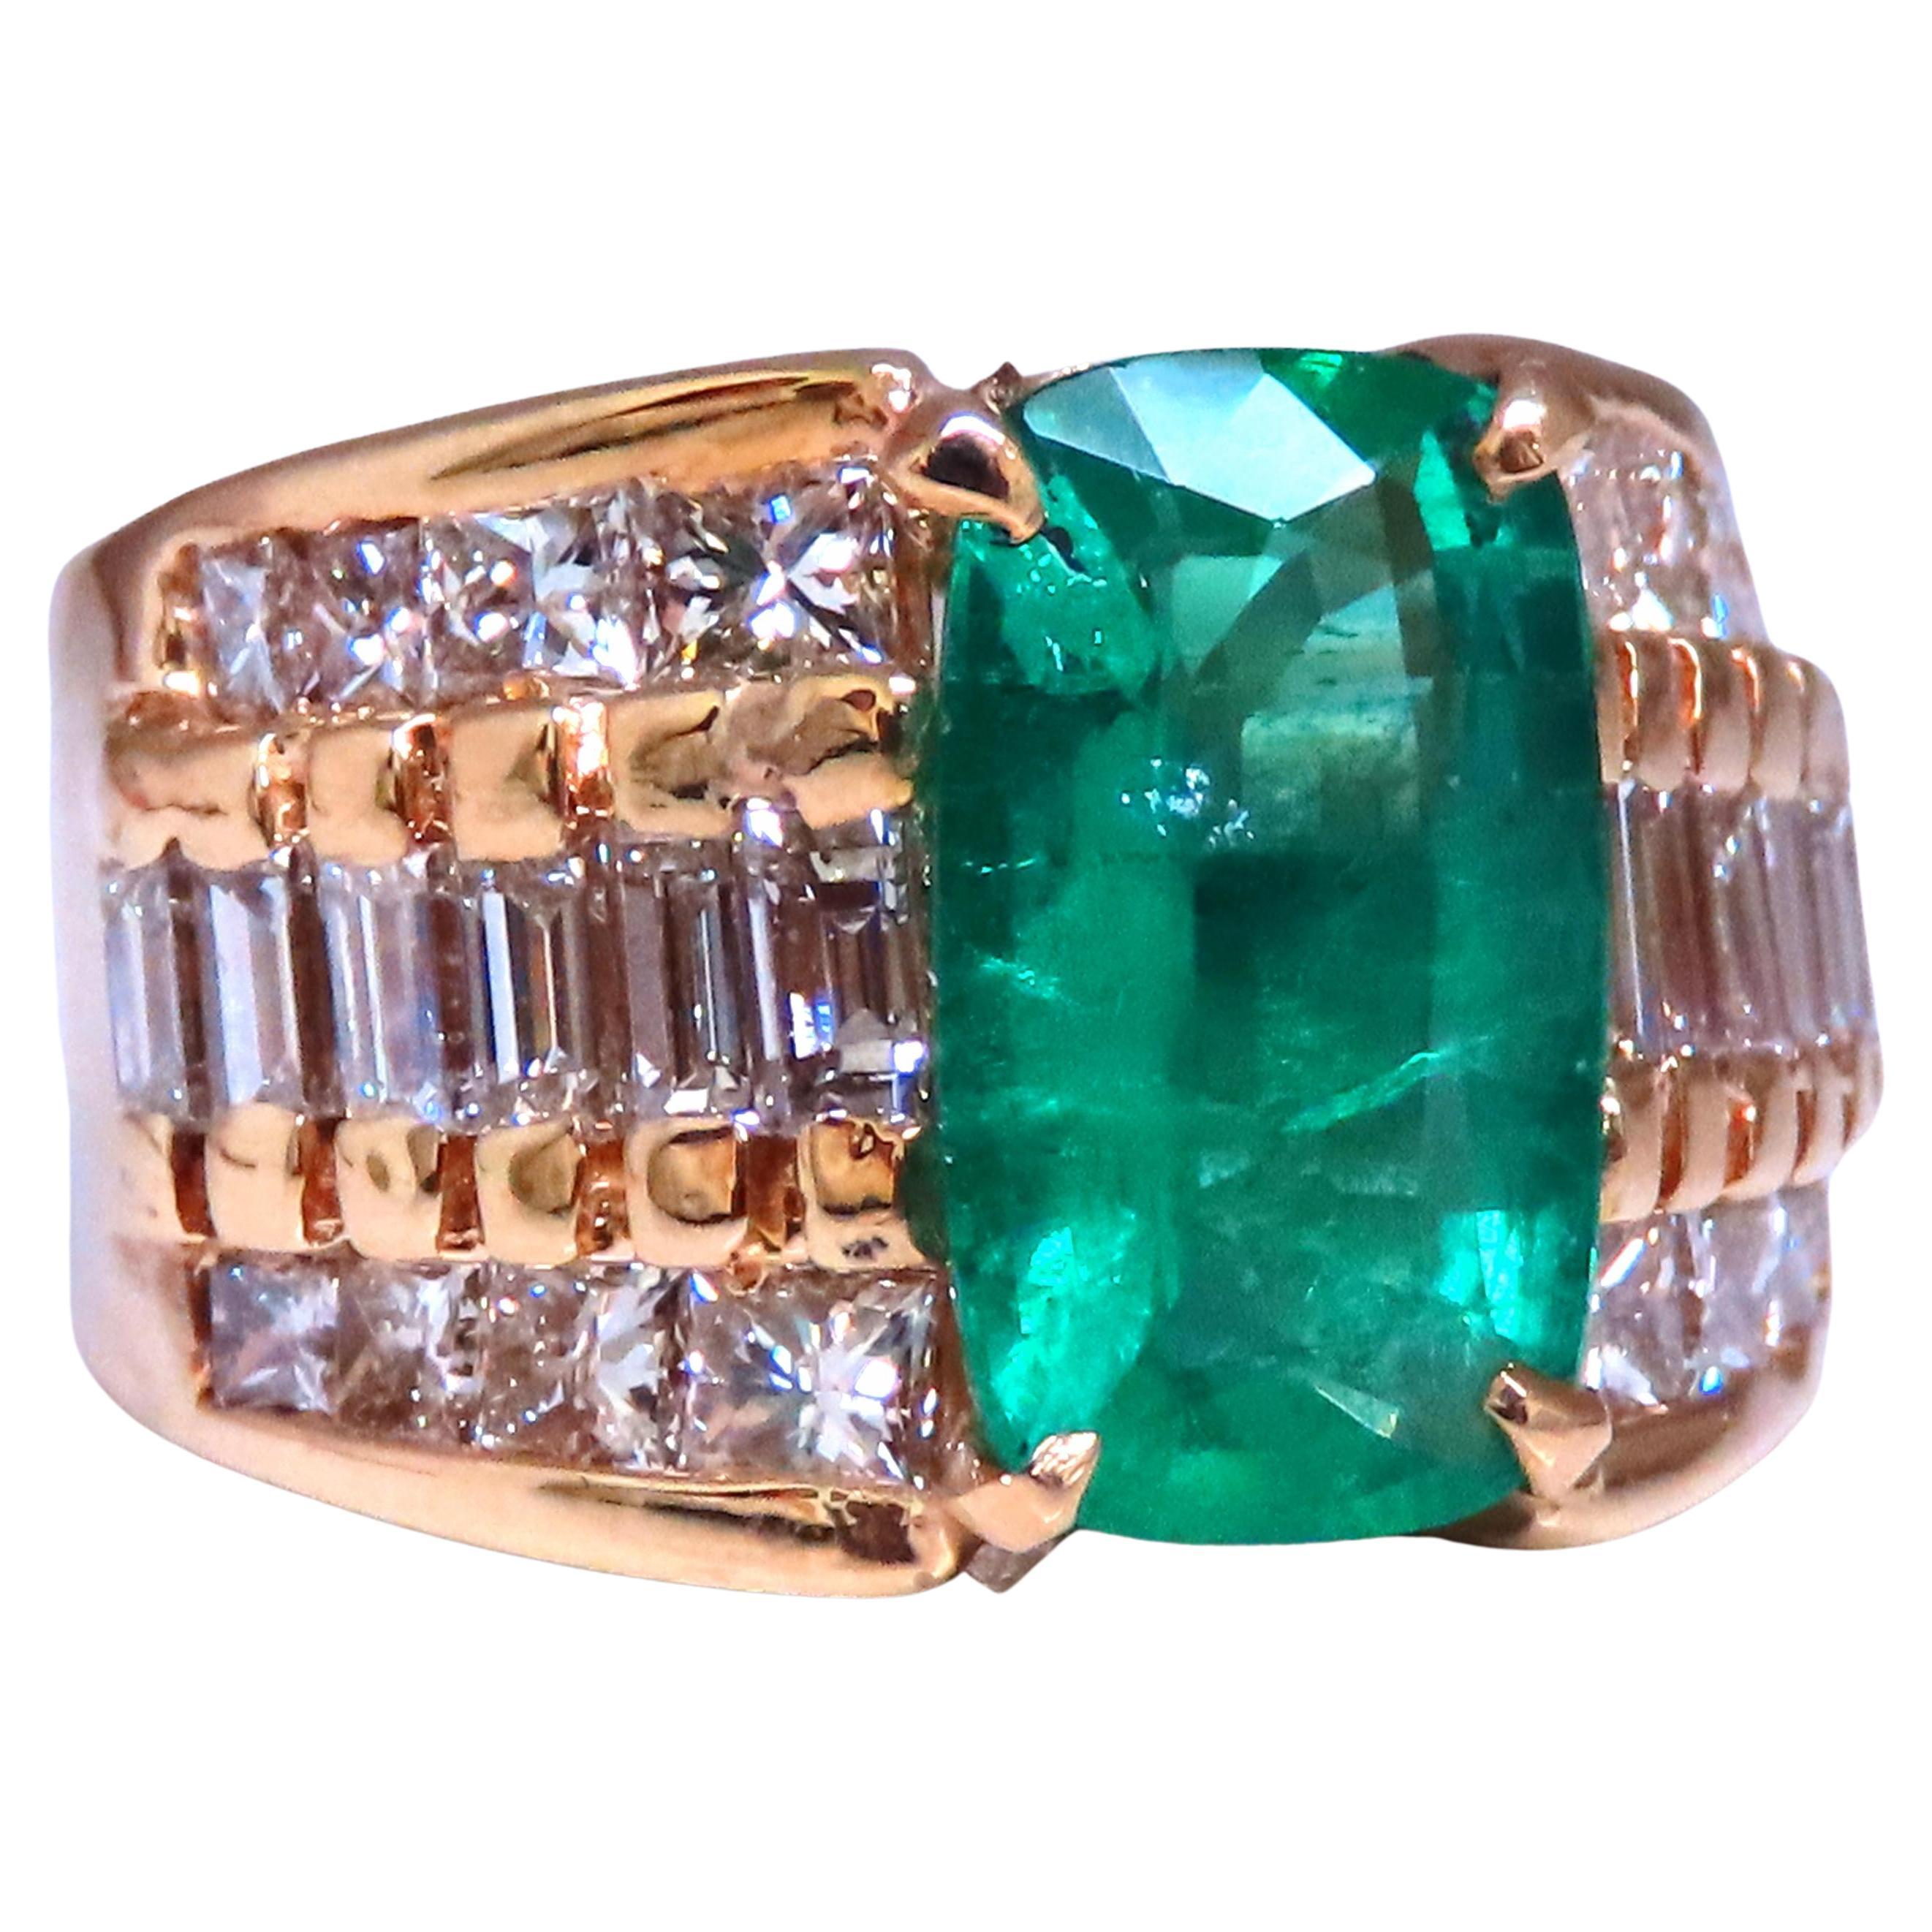 GIA Certified 3.01ct Natural Emerald Diamonds Ring 14kt Gold 12360 For Sale